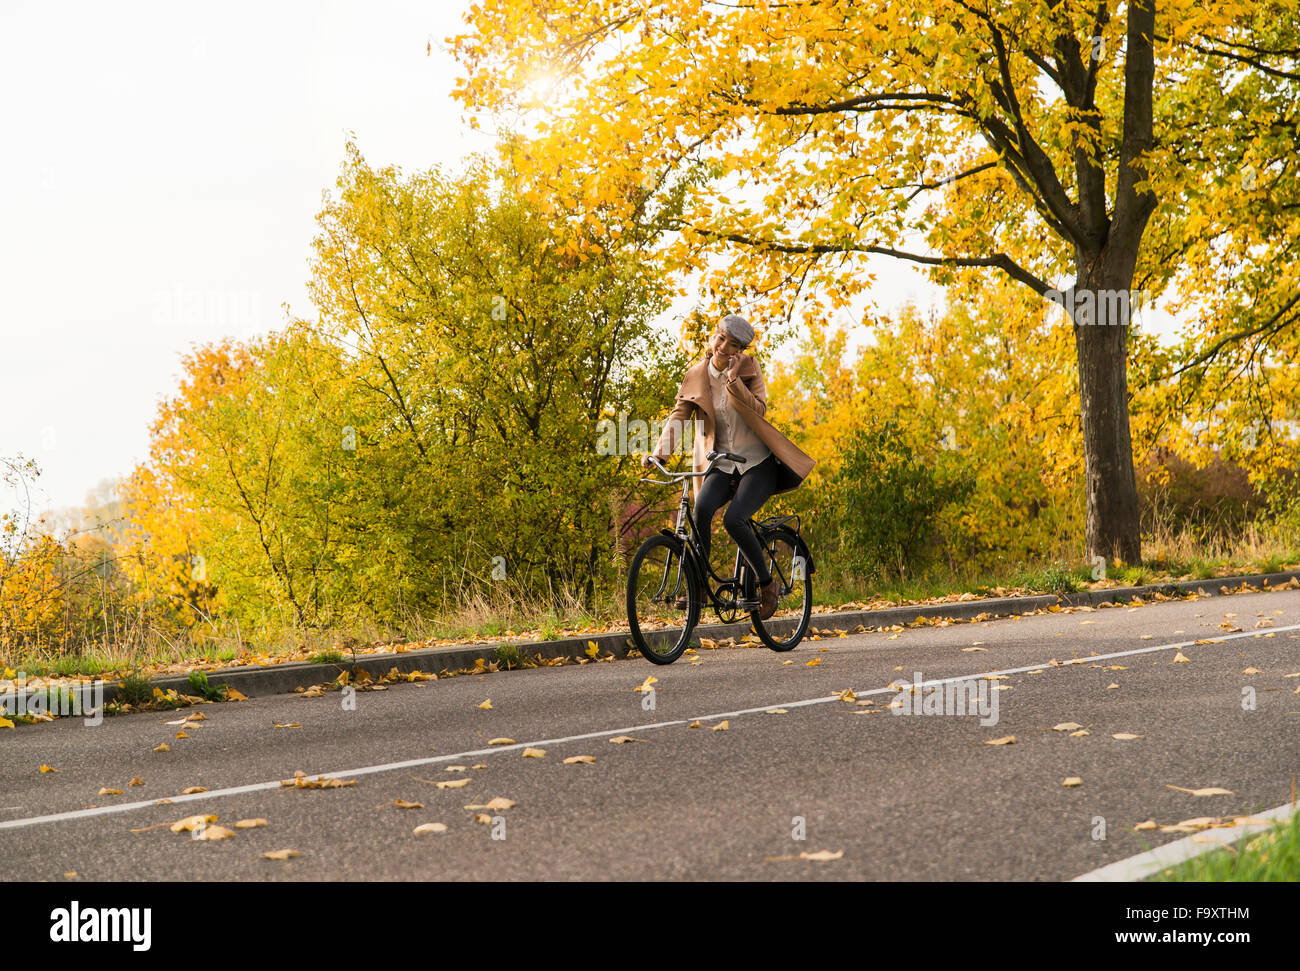 Young woman on cell phone riding bicycle in paysage d'automne Banque D'Images